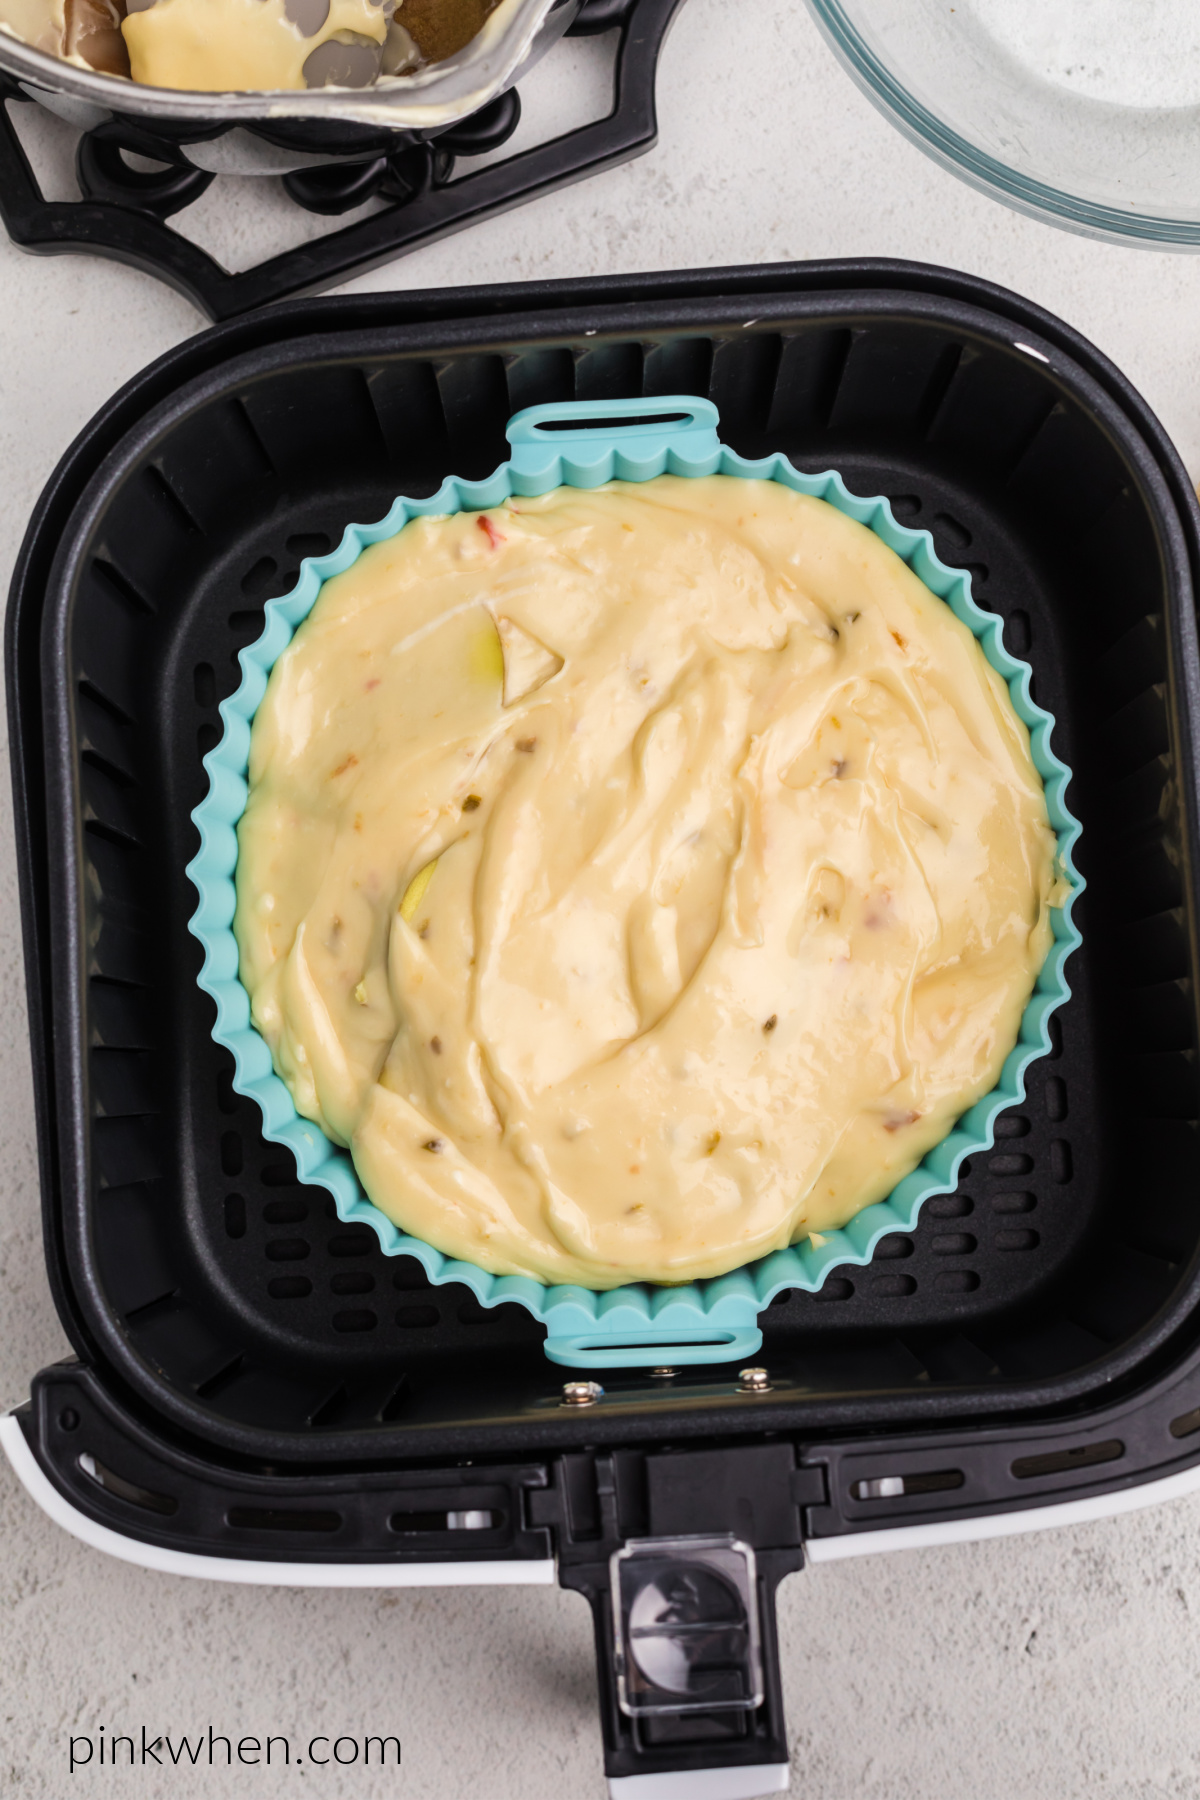 Cheesy scalloped potatoes in the basket of the air fryer.